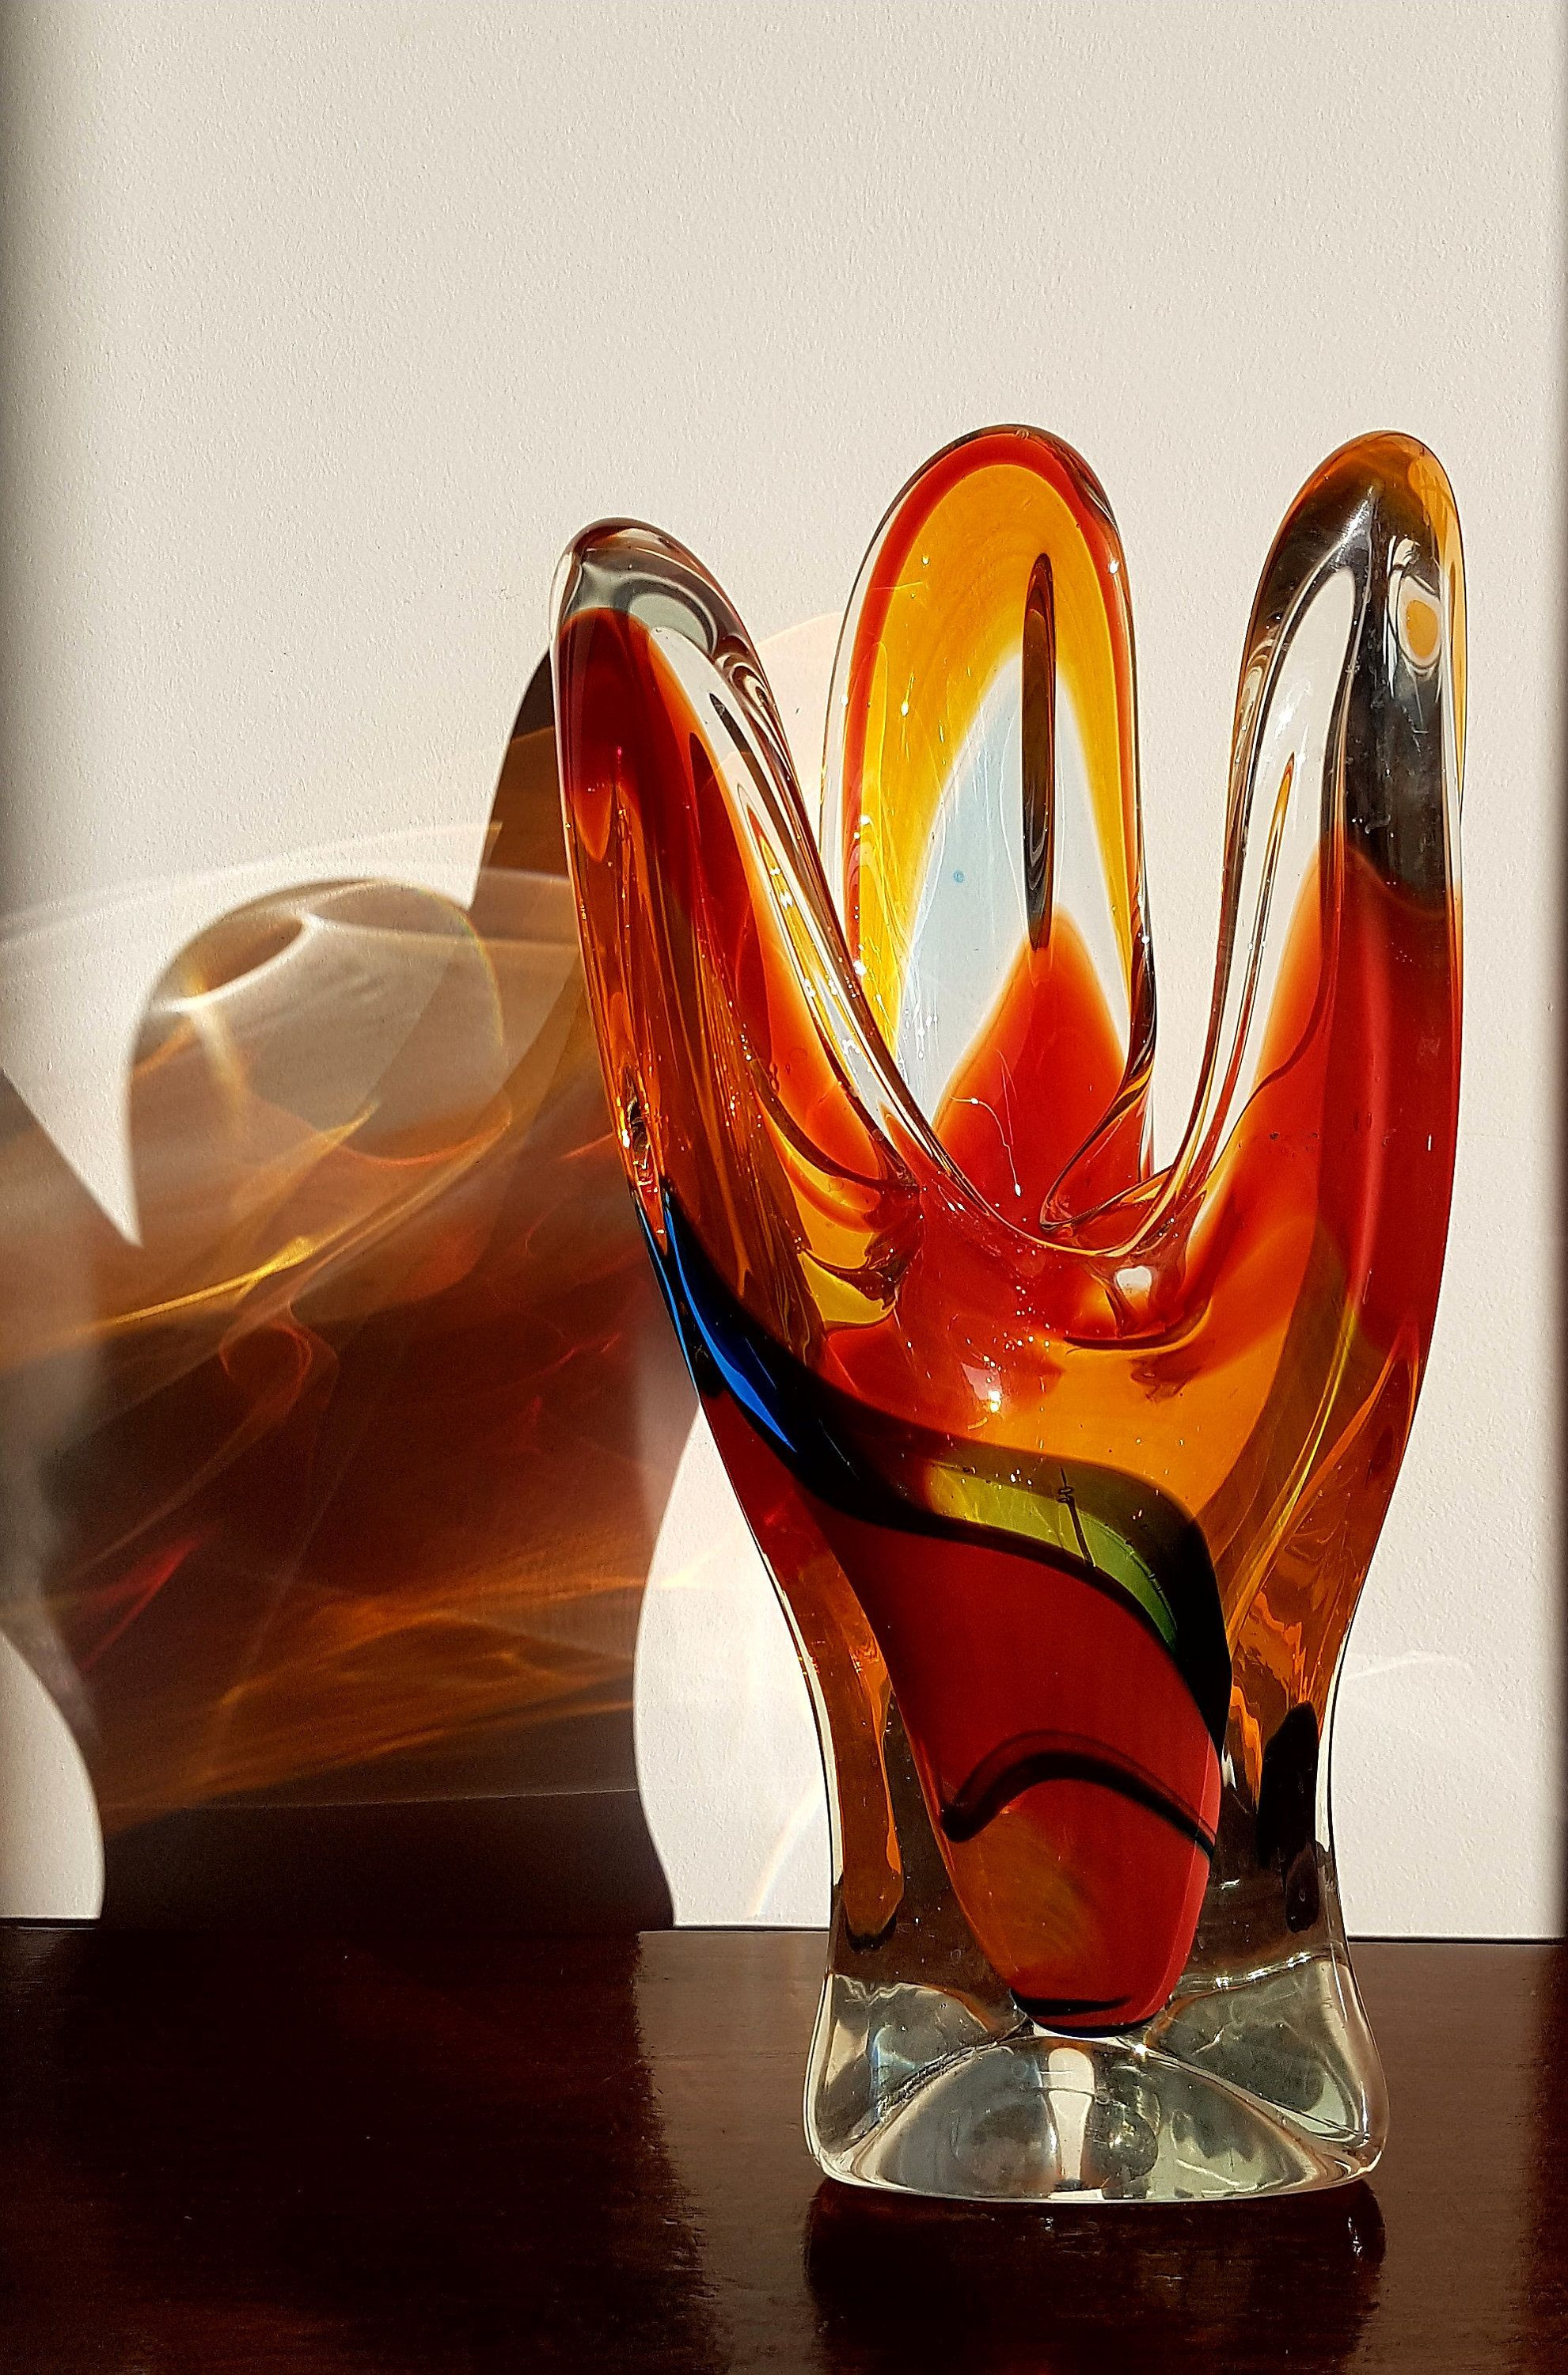 29 Best Blown Glass Vases for Sale 2024 free download blown glass vases for sale of pin by steven wolff on transparent glass sculptures in 2018 regarding pin by steven wolff on transparent glass sculptures in 2018 pinterest vintage japanese and